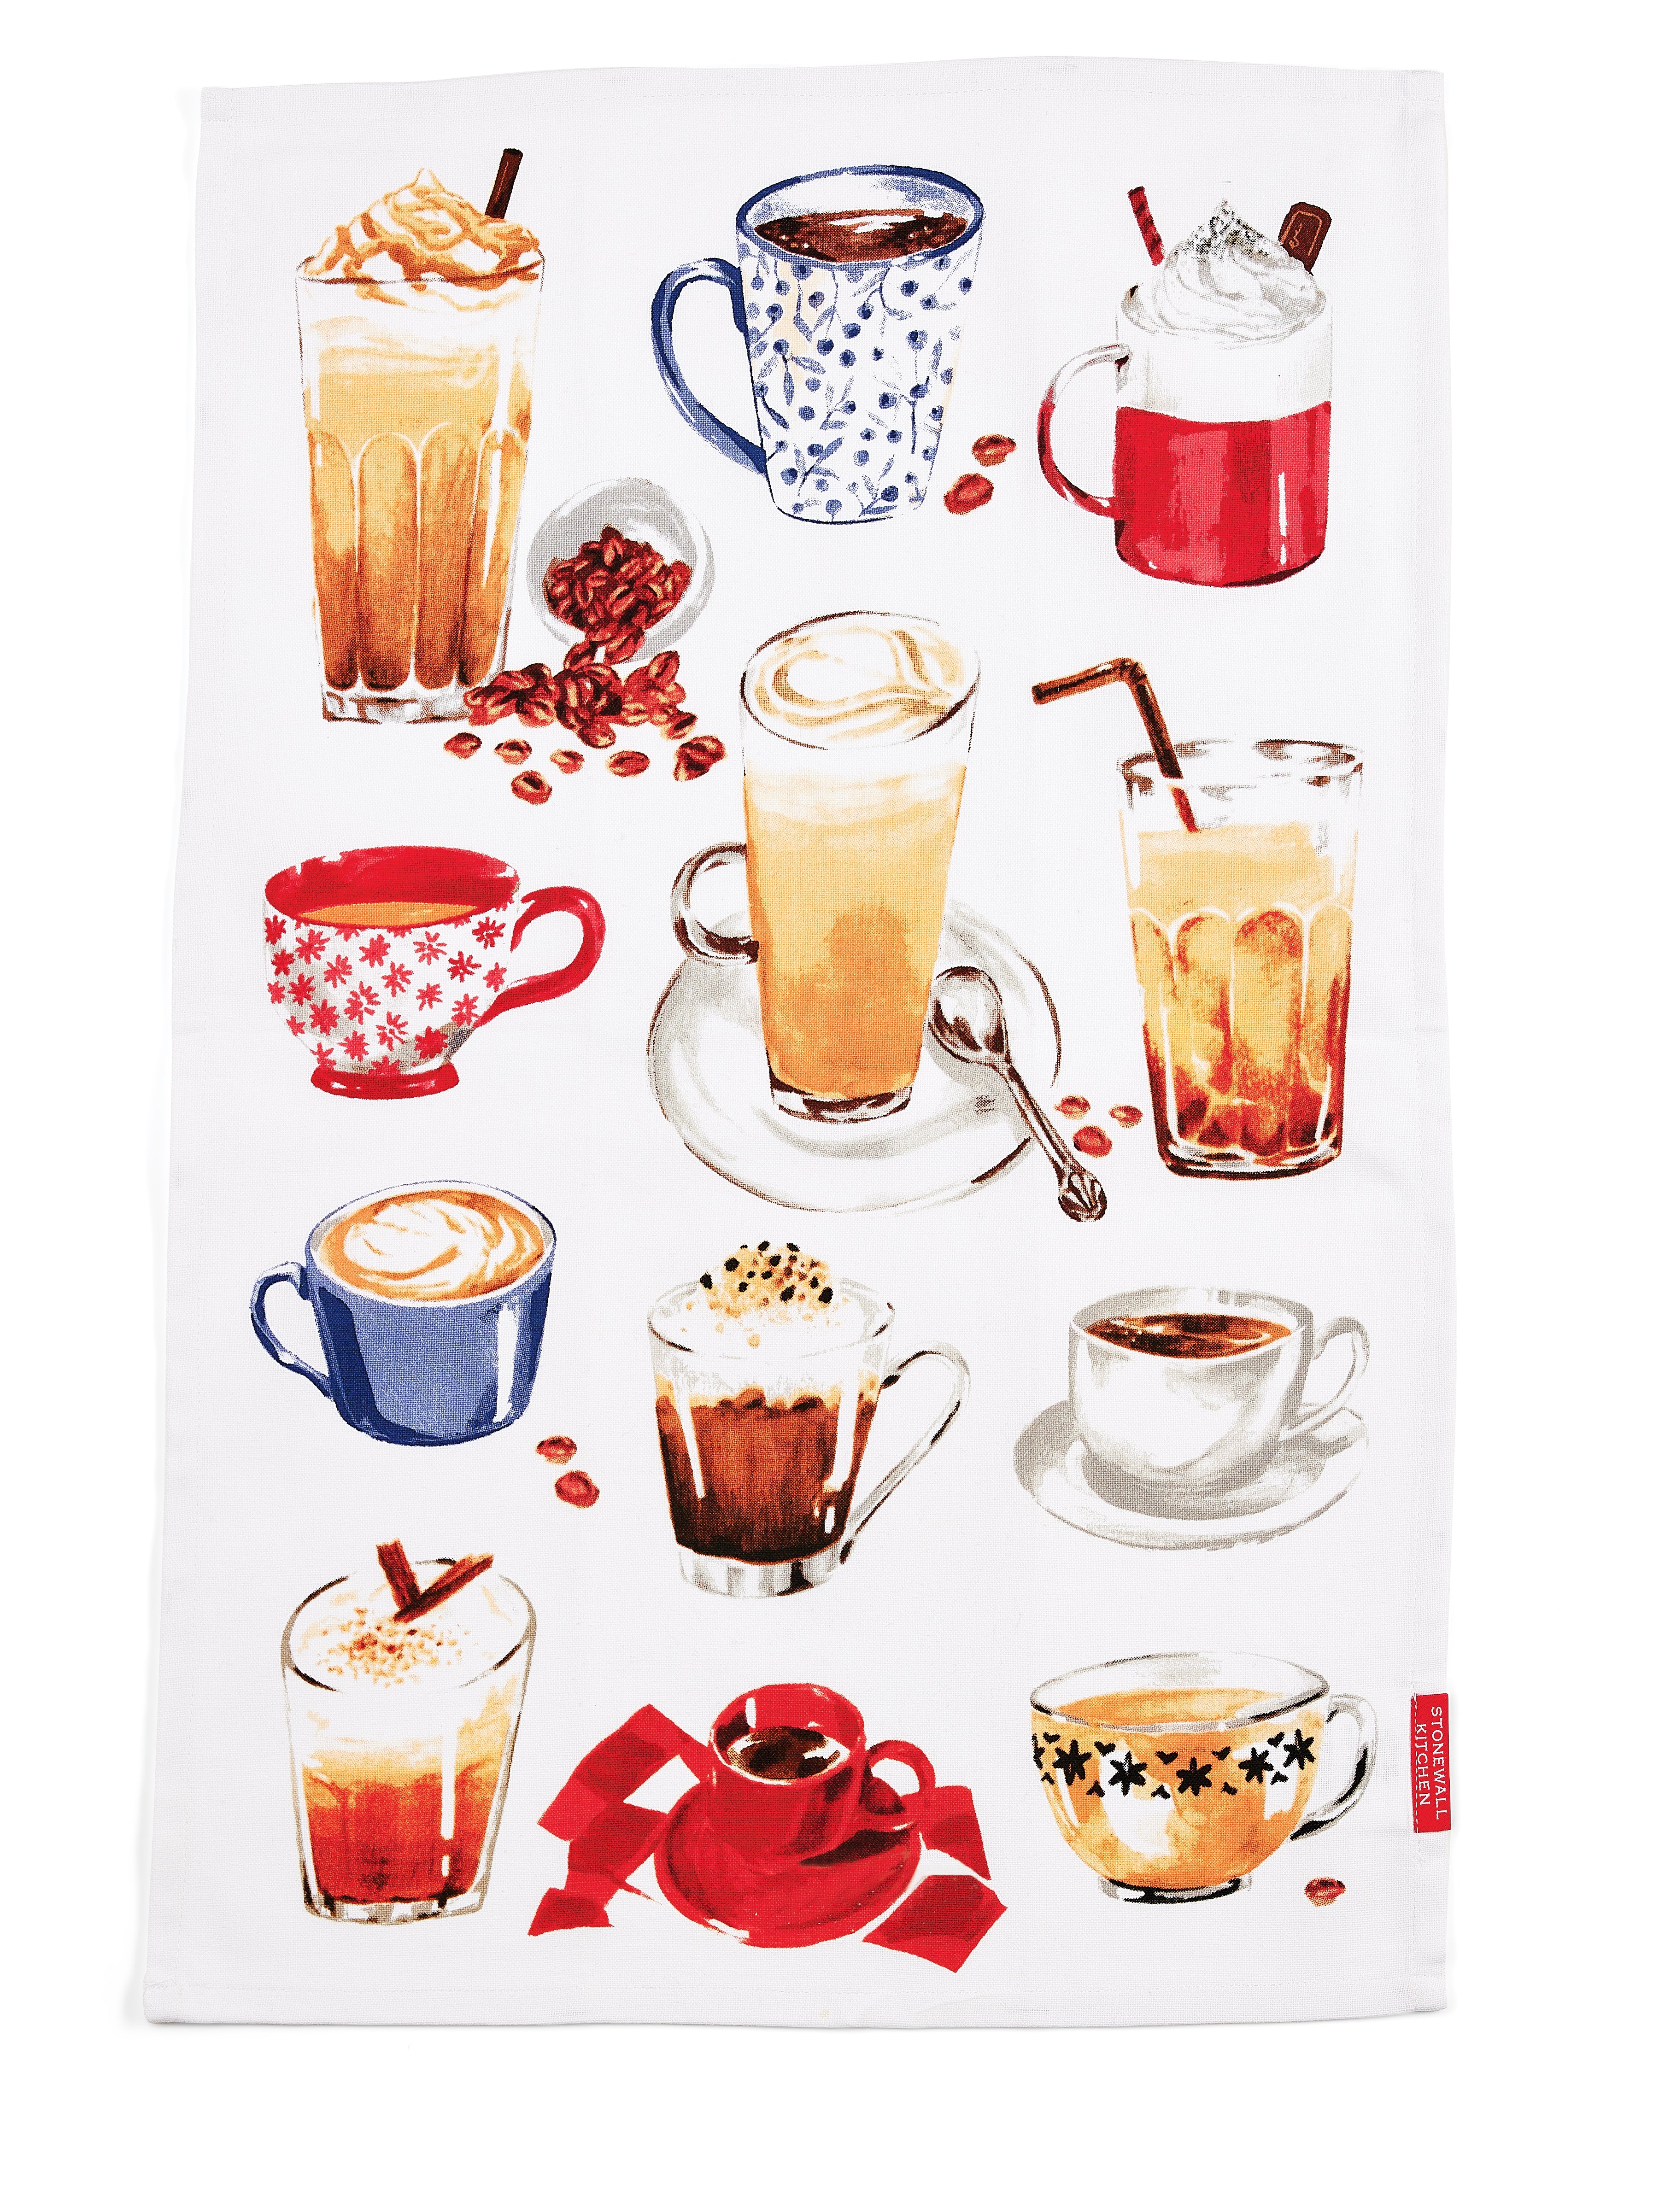 Stonewall Kitchen Food and Drink Patterned Tea Towels - Olive Oil Etcetera 